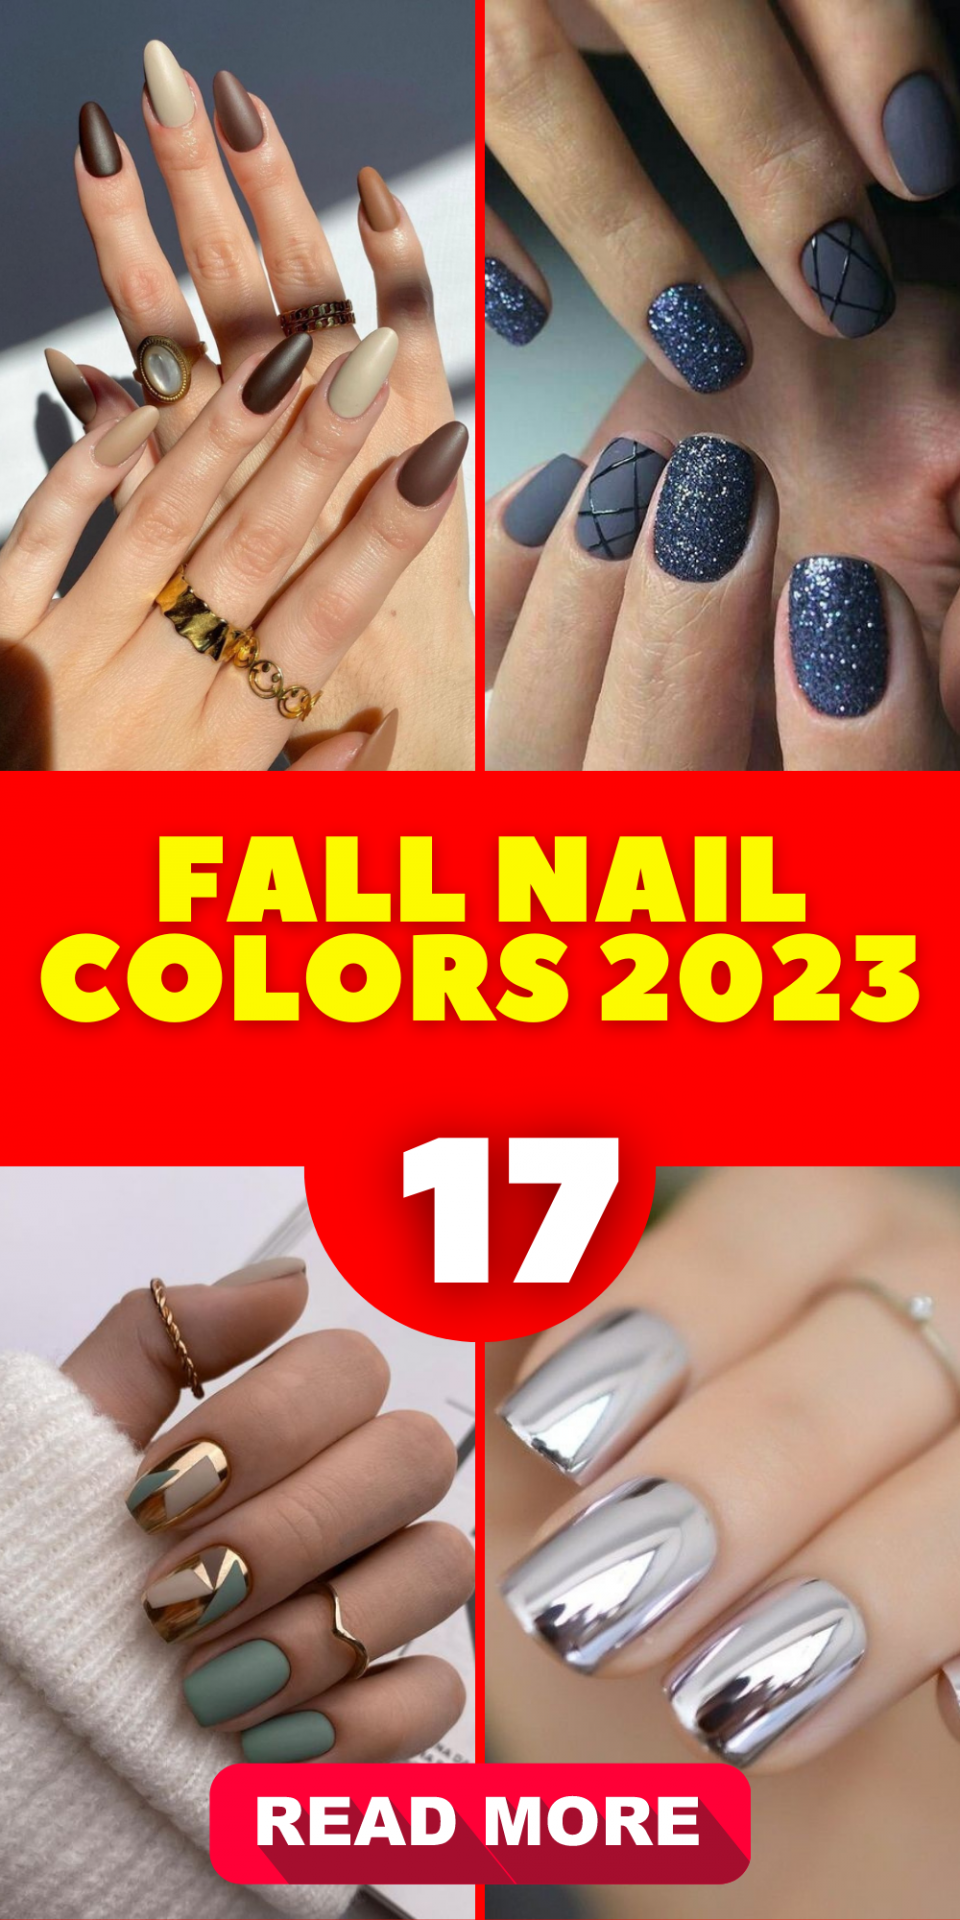 Fall 2023 Fashion Forecast: The Trendiest Nail Colors for All Skin Tones